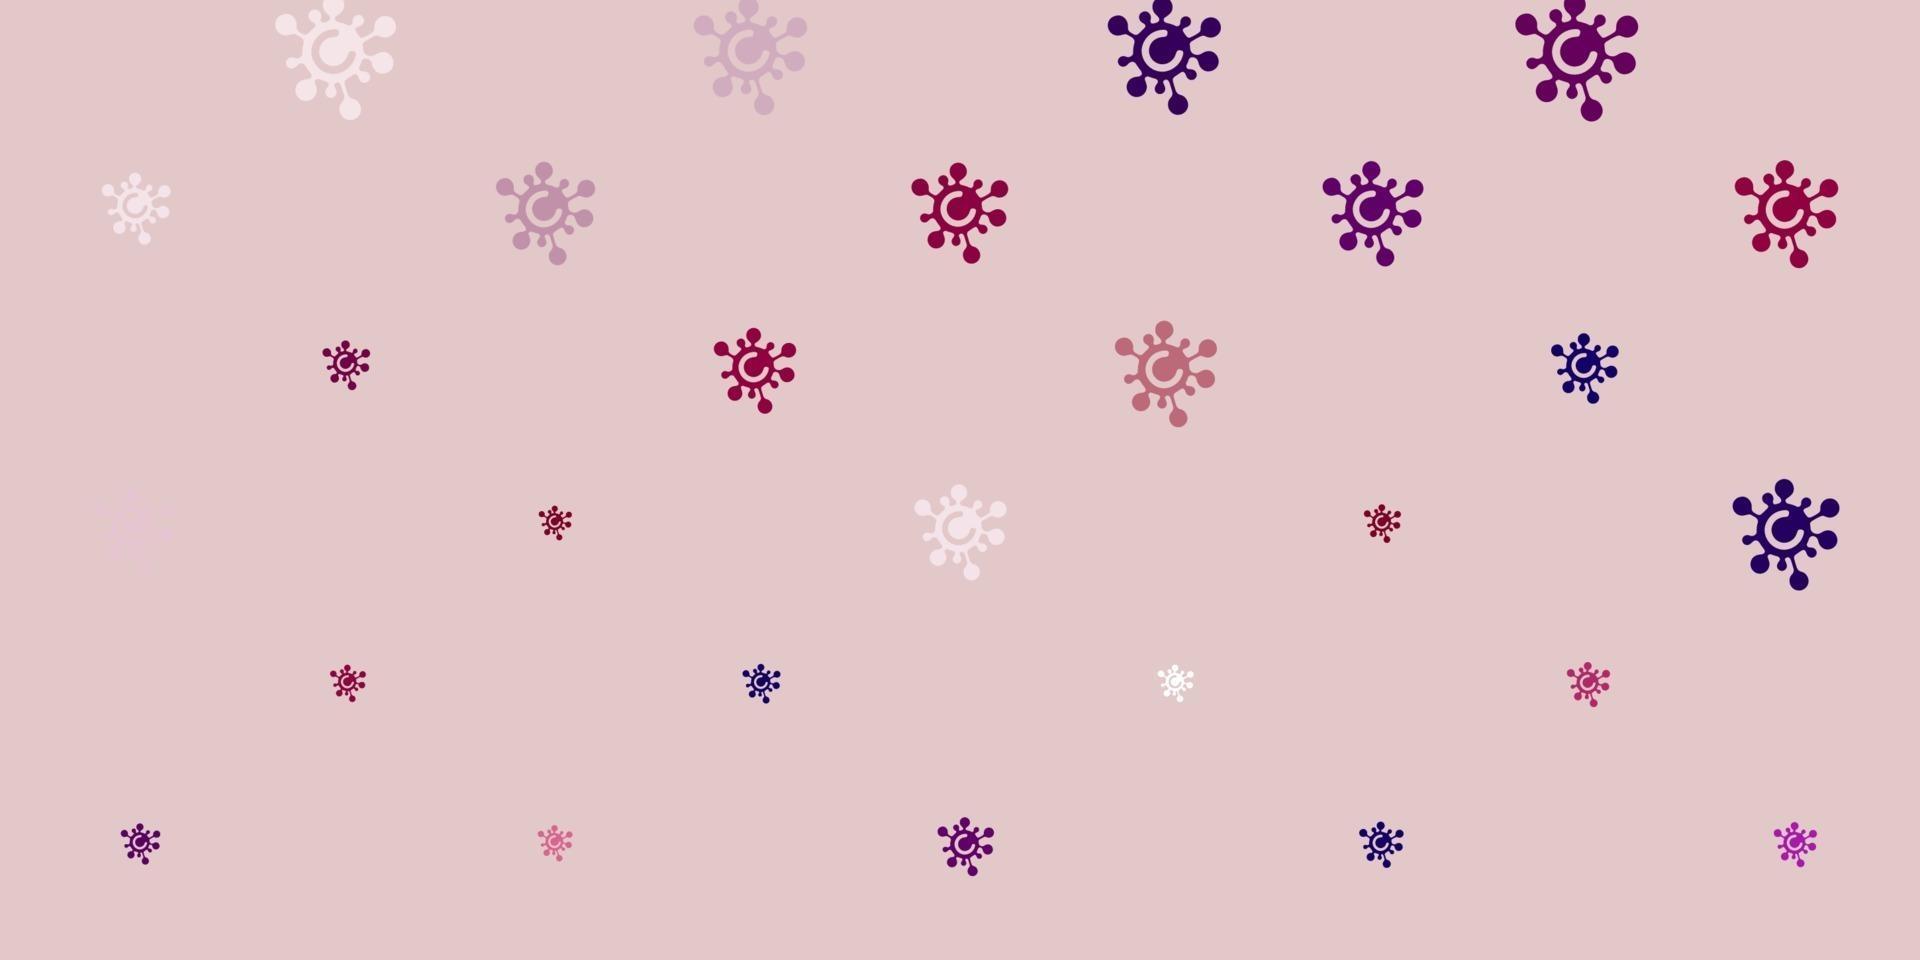 Light Pink vector texture with disease symbols.